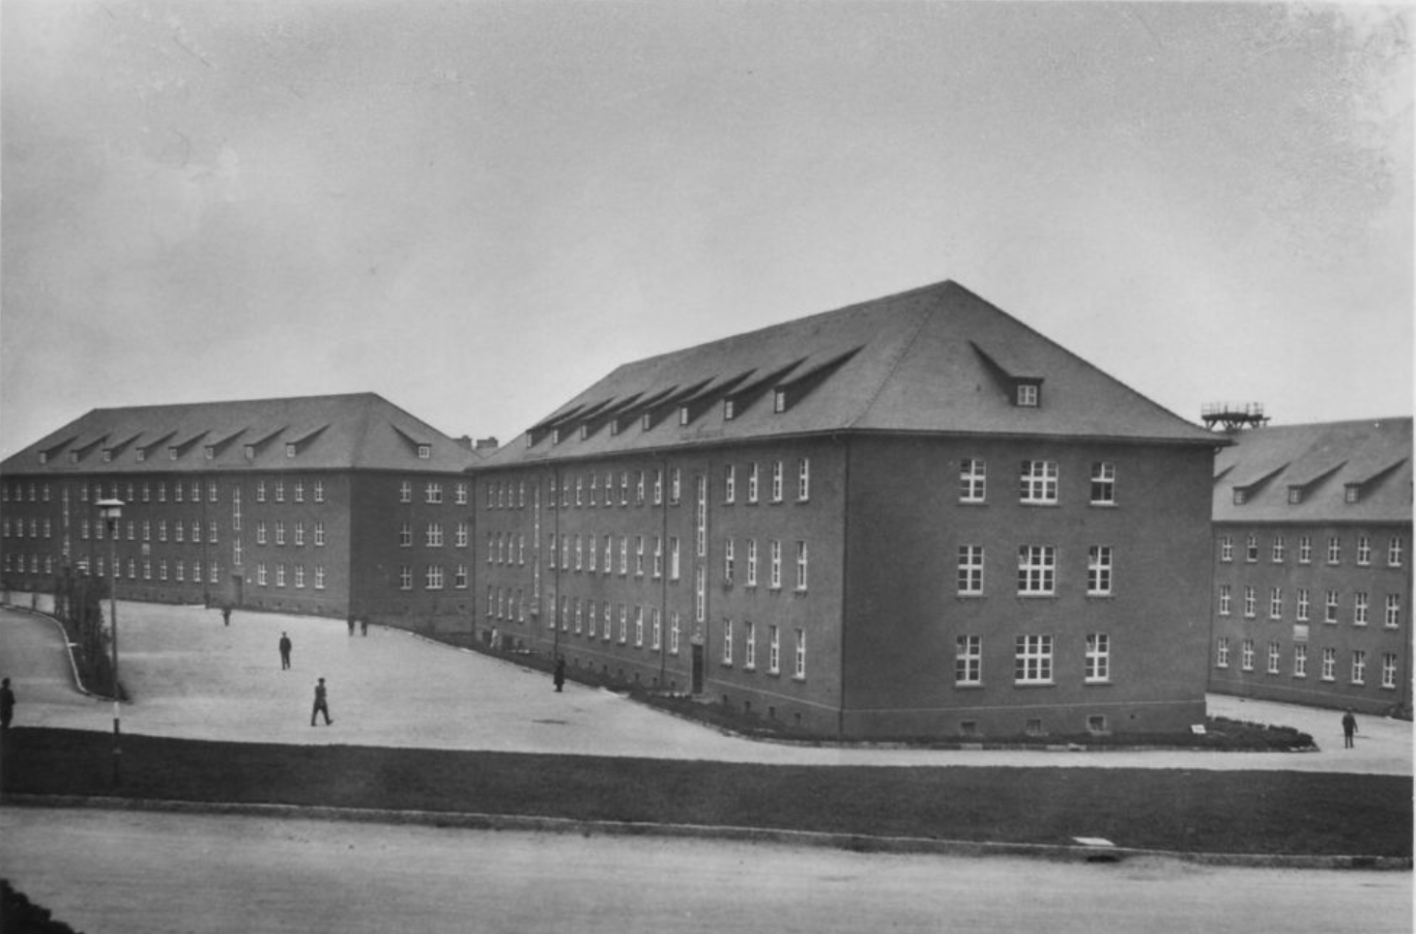 In the picture you can see a total of 3 barracks buildings built in the same style. All three are elongated and have three floors. In front of them a few people.